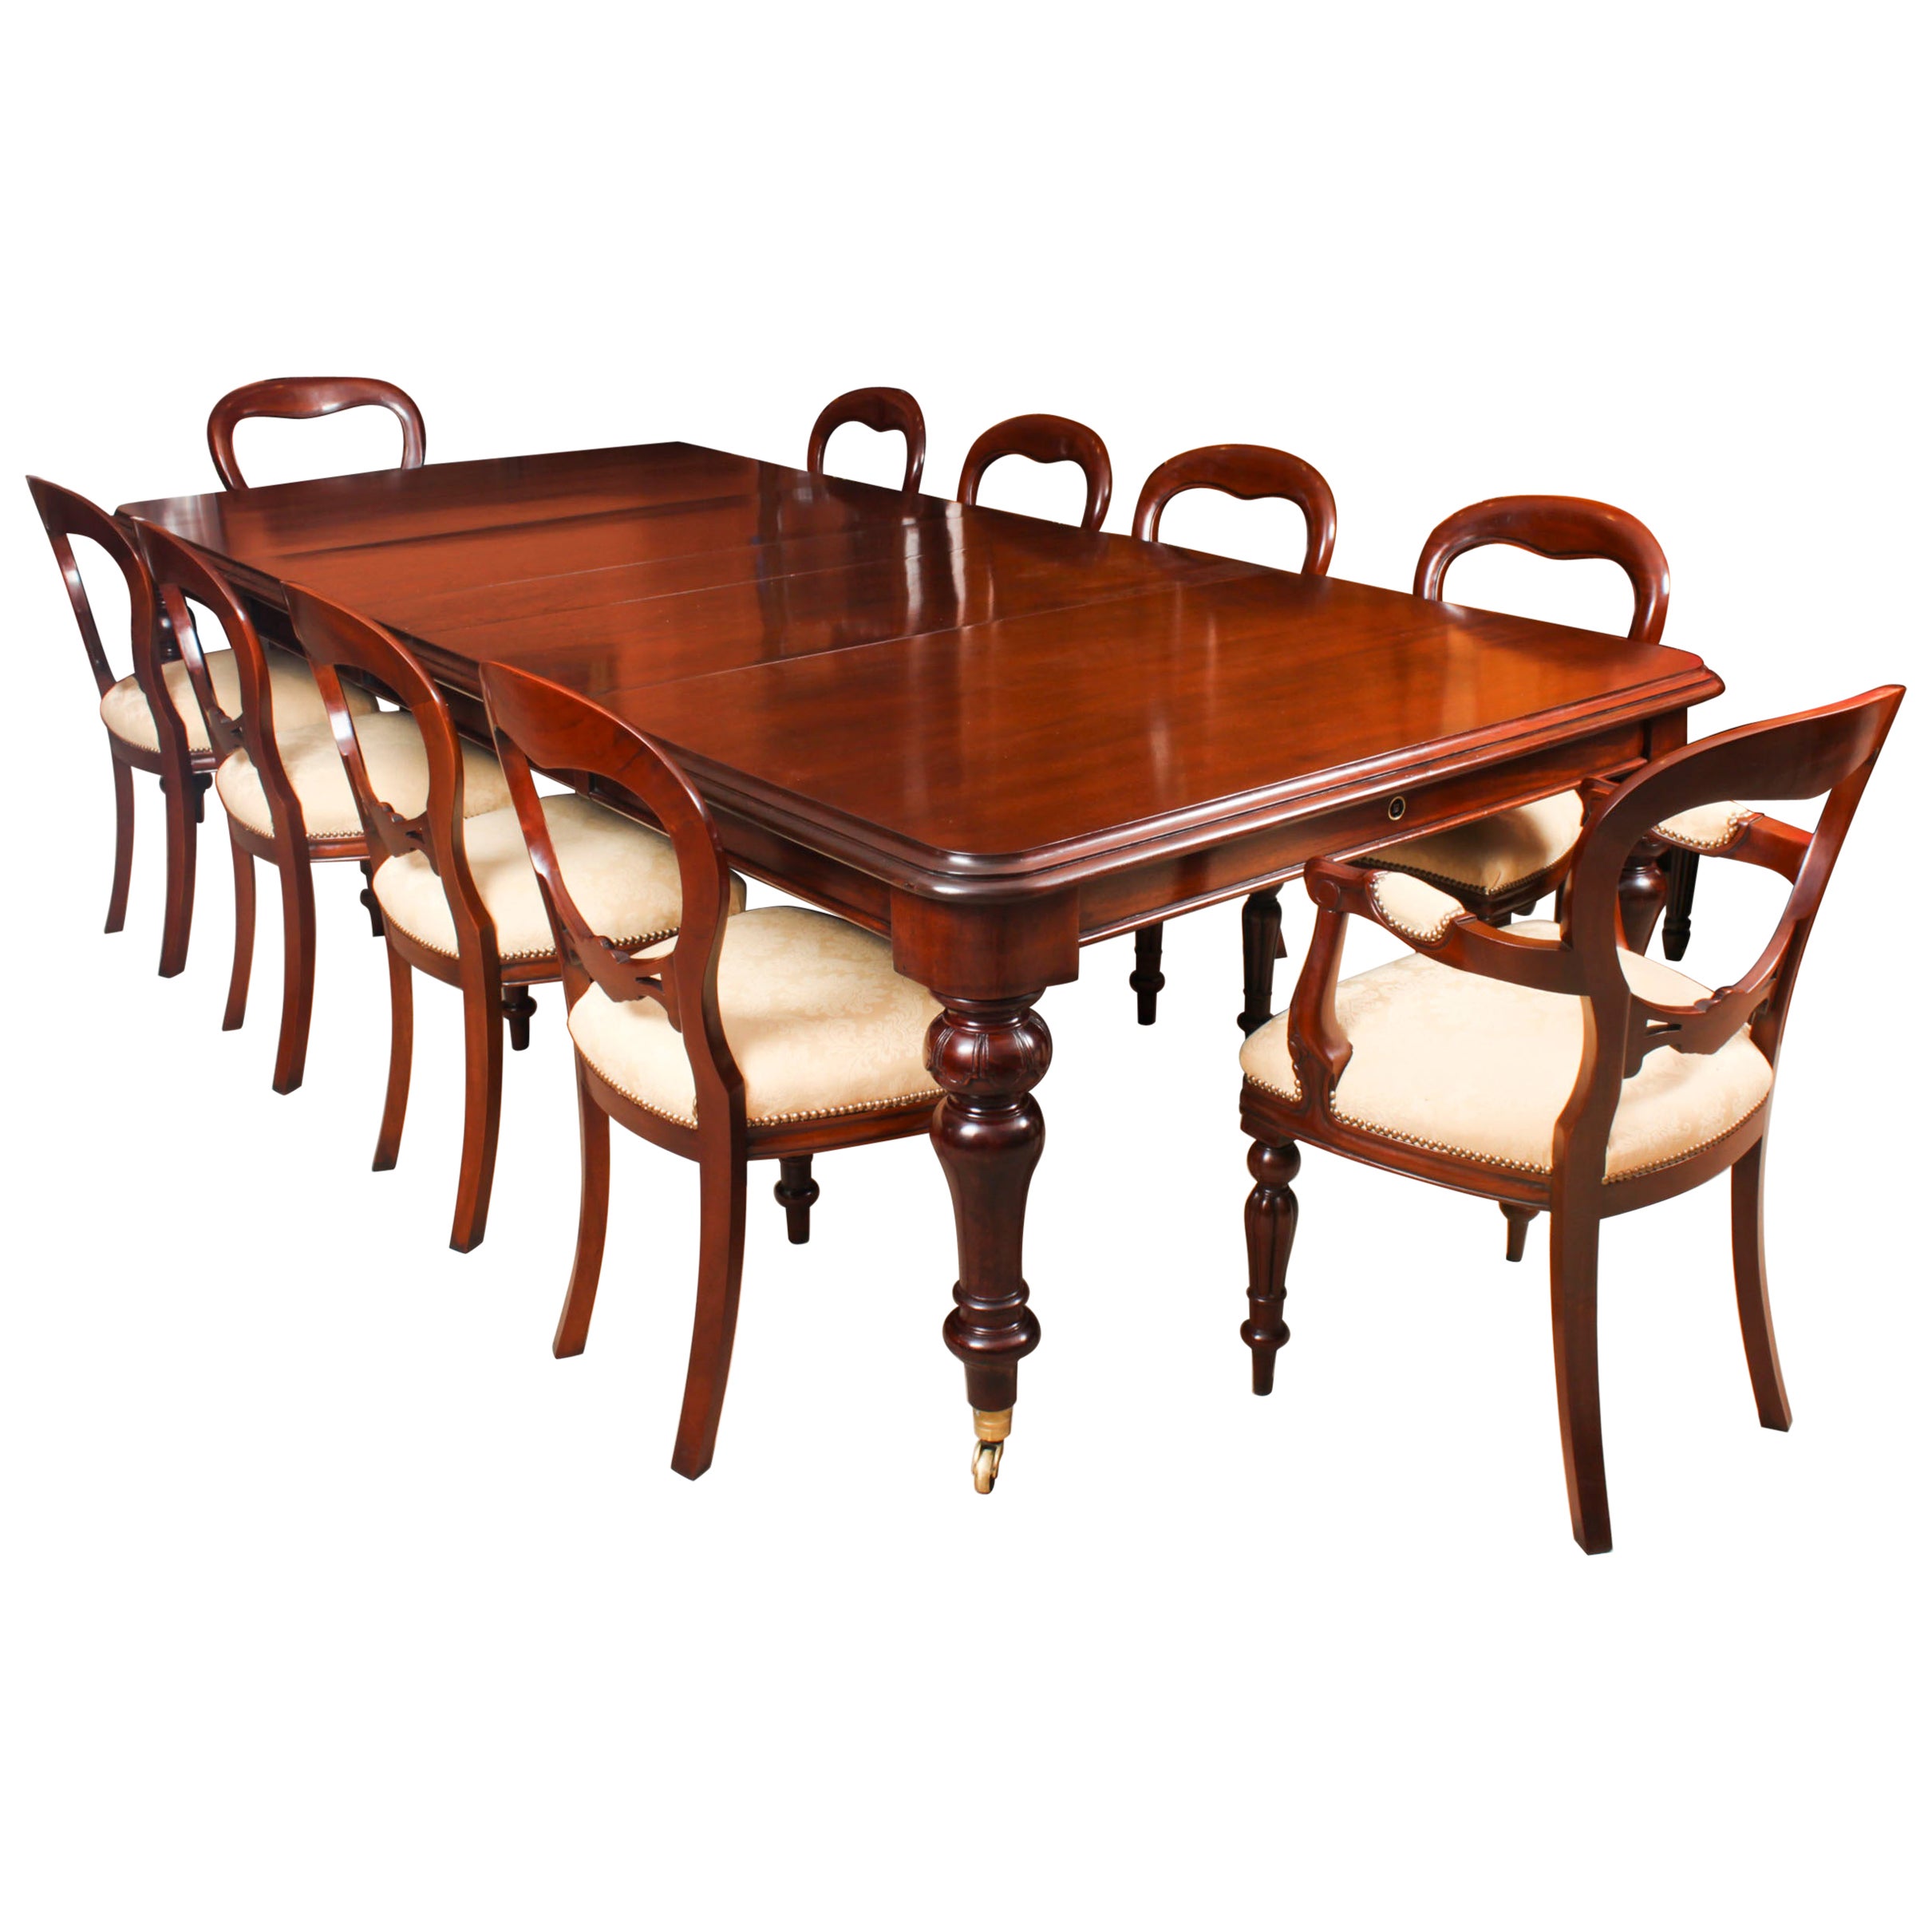 Antique William IV Mahogany Dining Table C1835 & 10 Balloon back dining chairs For Sale